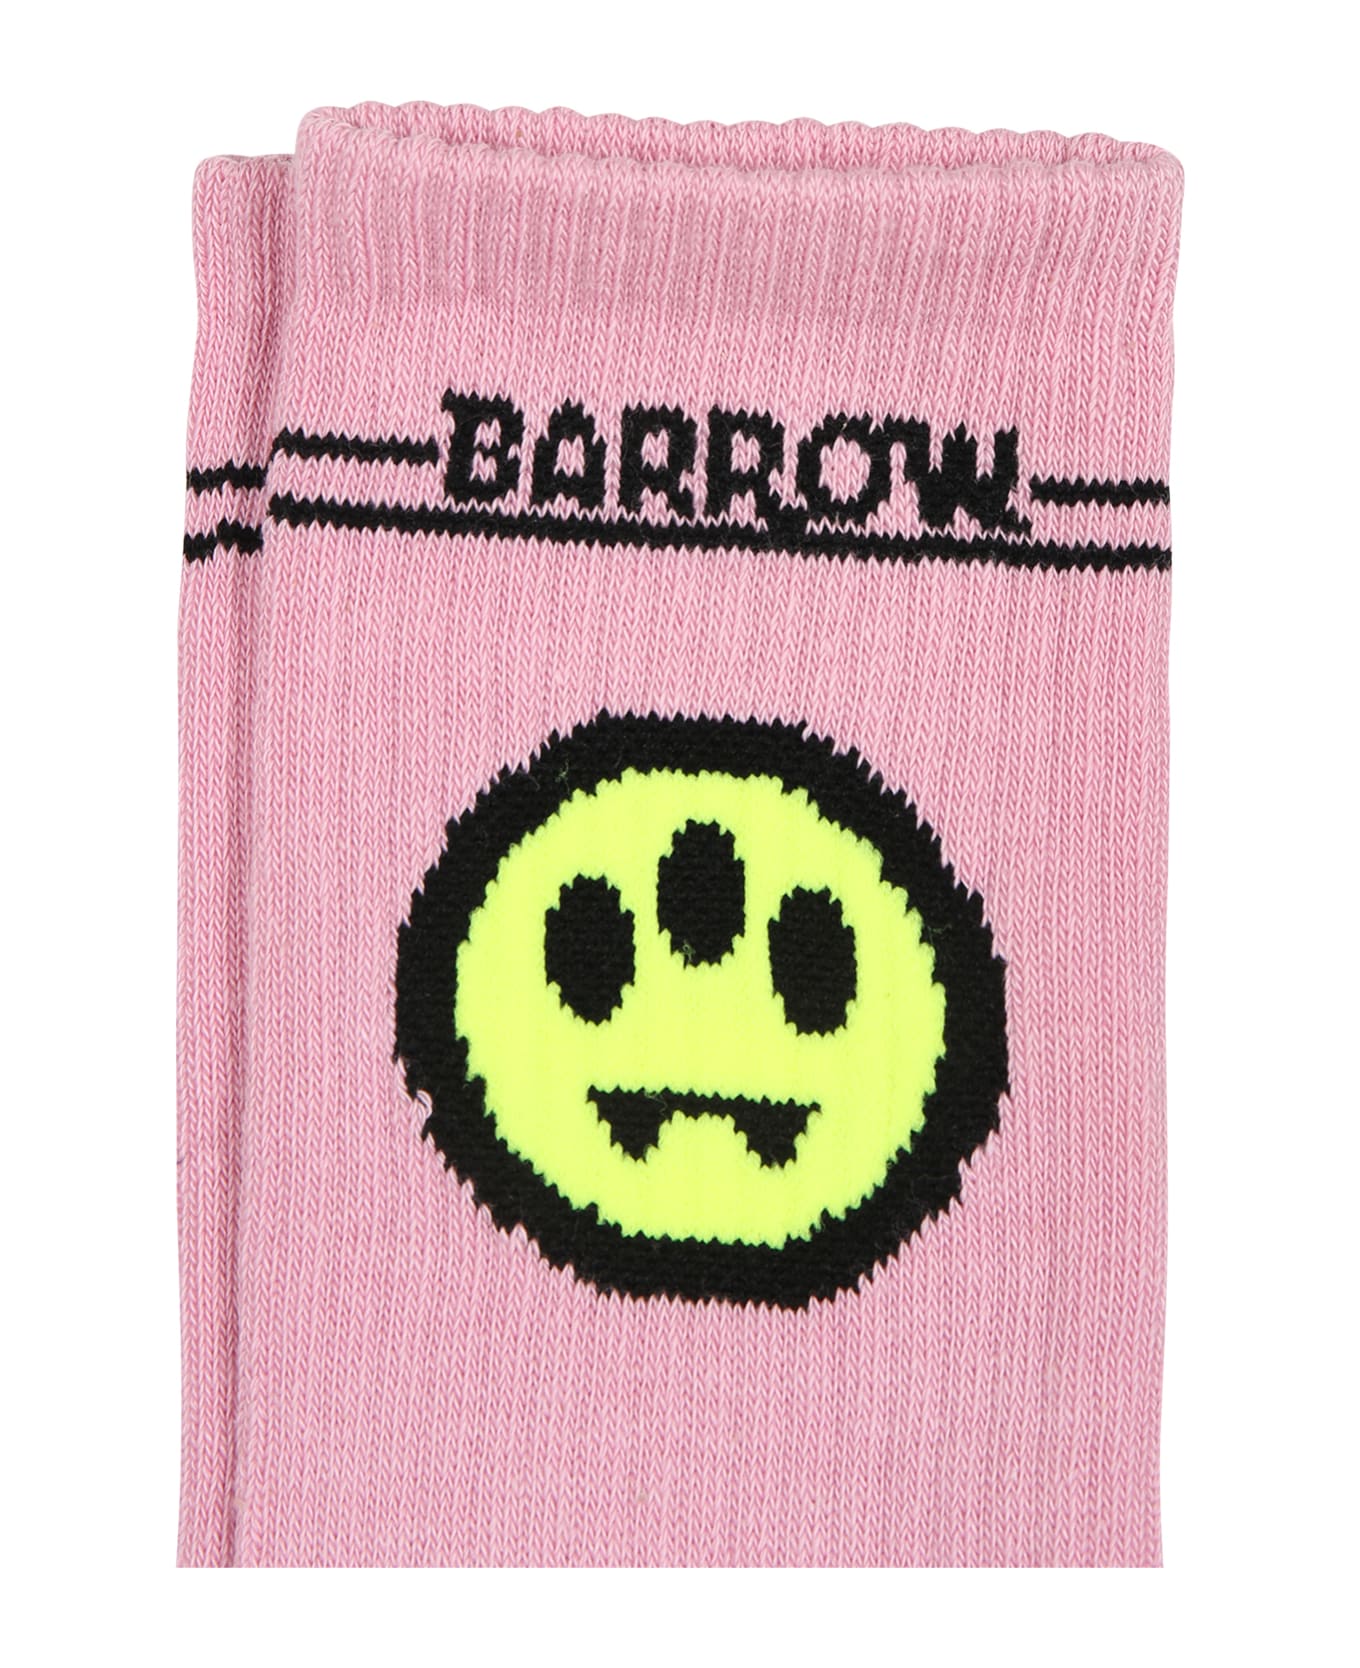 Barrow Pink Socks For Kids With Logo And Smiley - Rosa